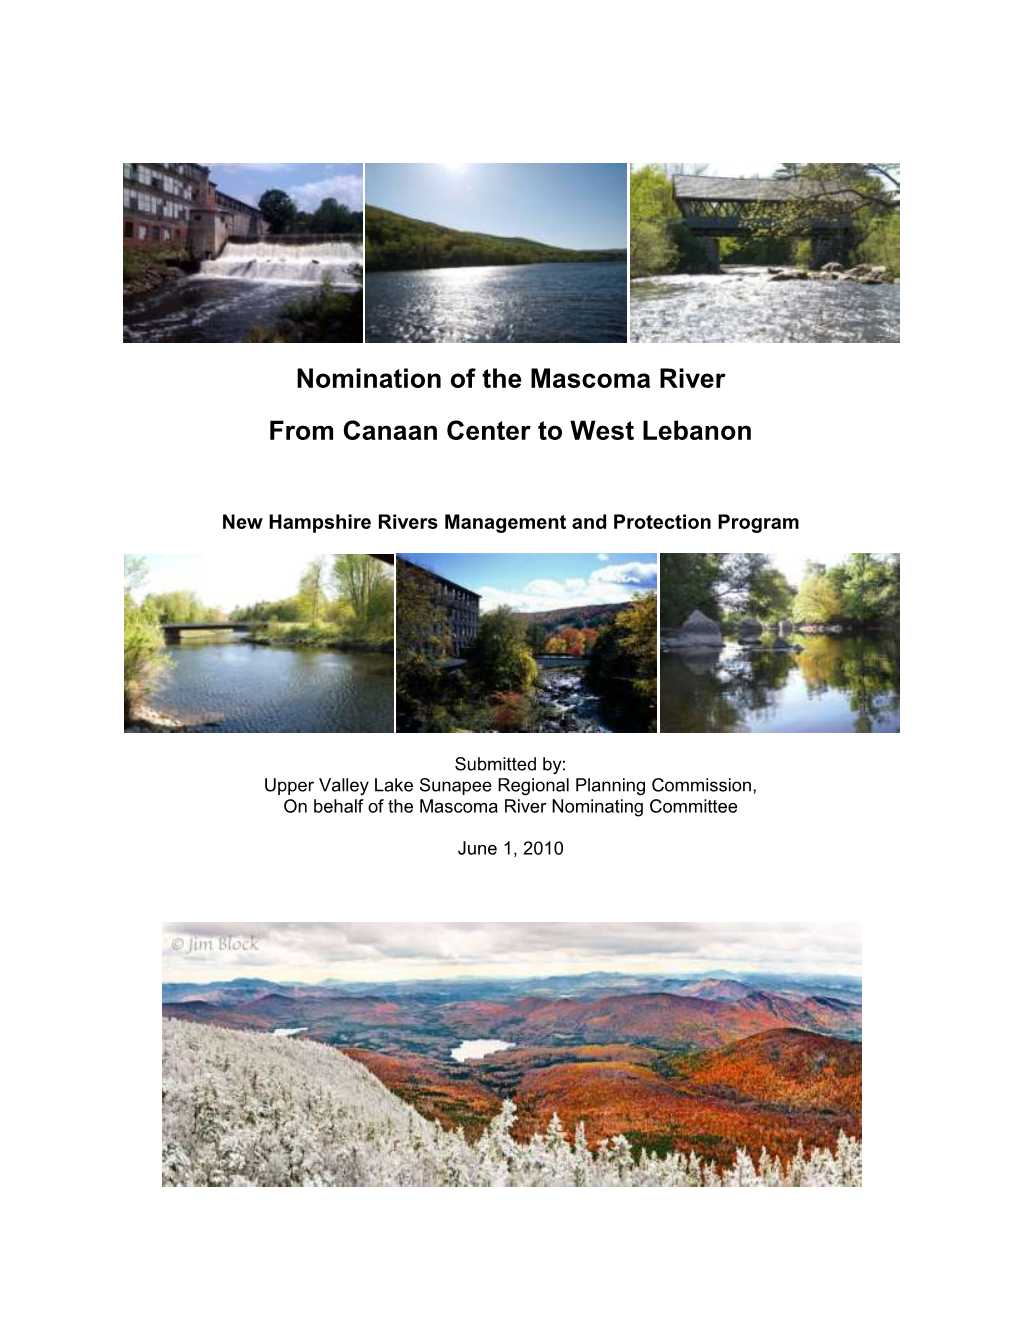 Nomination of the Mascoma River from Canaan Center to West Lebanon